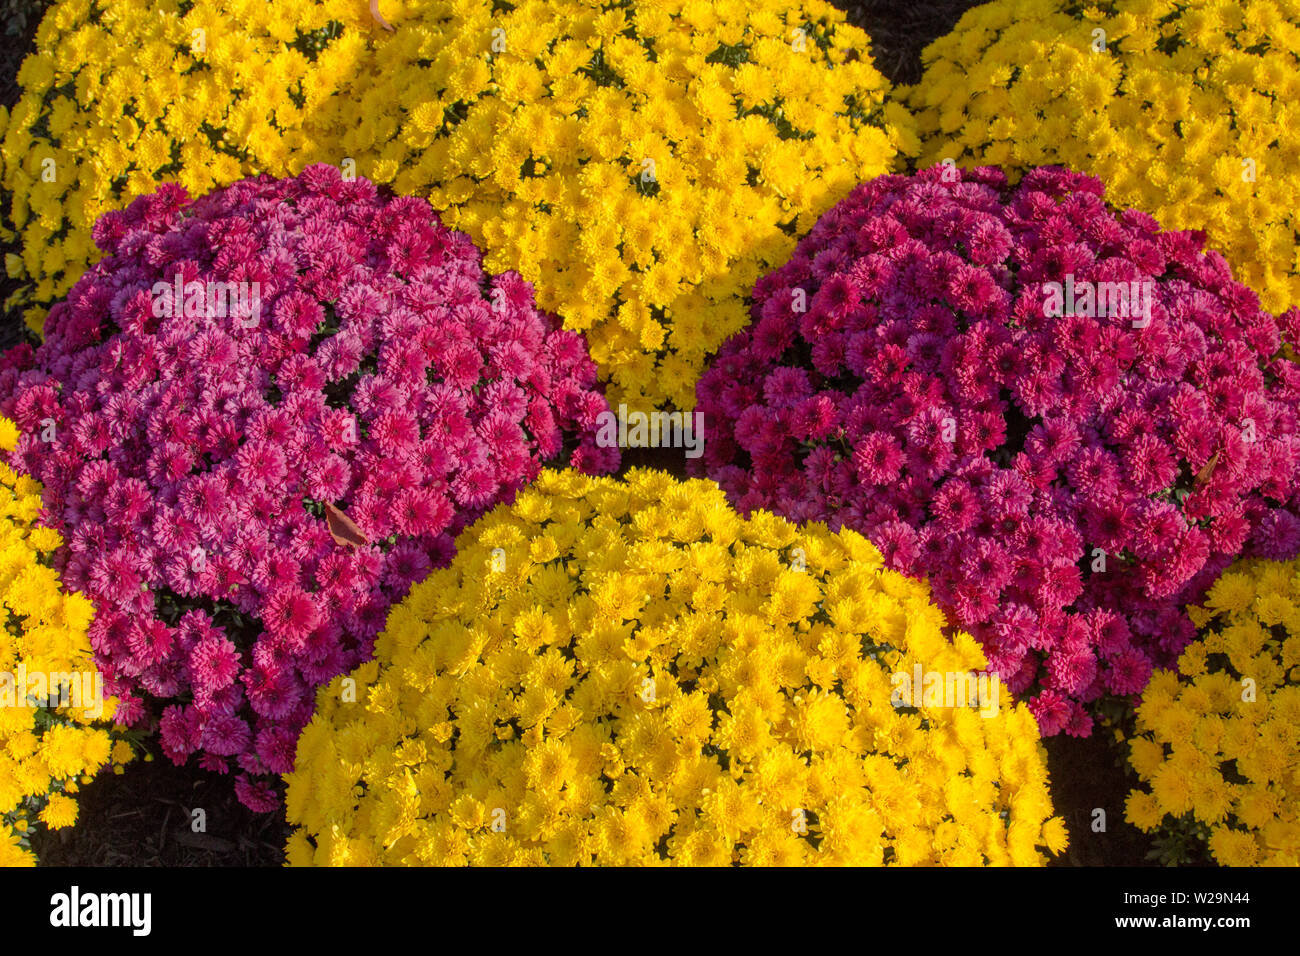 Multi Colored Potted Chrysanthemums. Group of red and yellow potted Chrysanthemum add vibrant color to the autumn garden. Shot from above Stock Photo